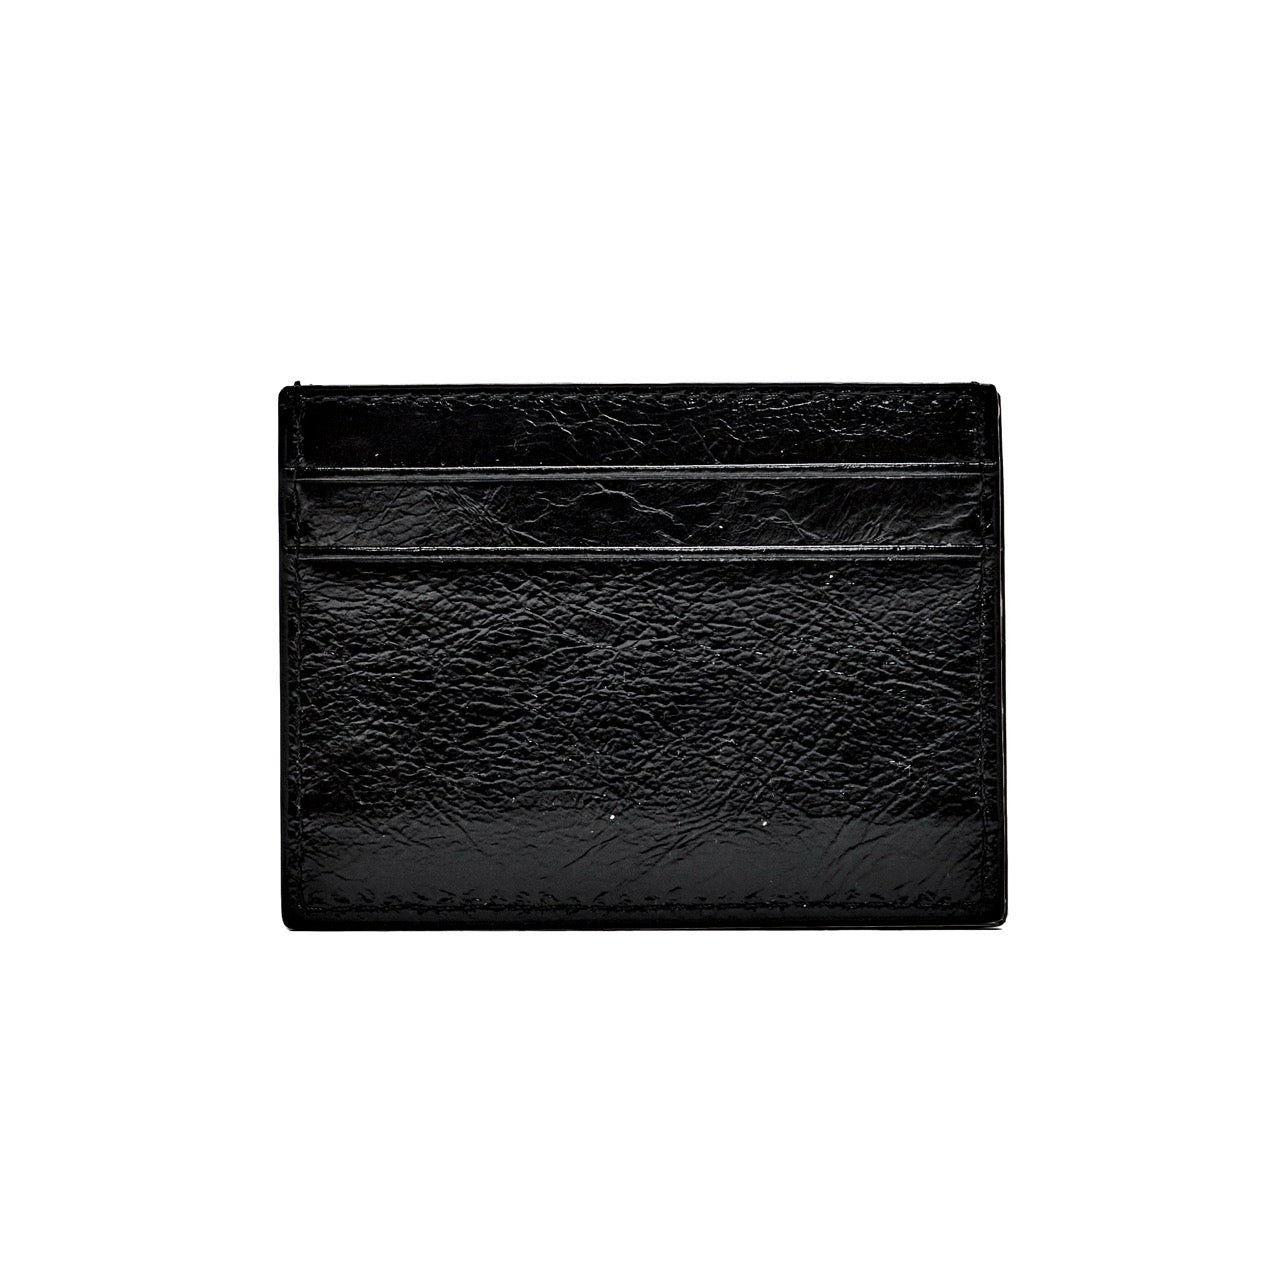 Classic in Black: Ivory & Ebony Wallet - 100% Genuine Leather, RFID Blocking - Redefine Your Everyday Carry with Effortless Style and Unmatched Protection.